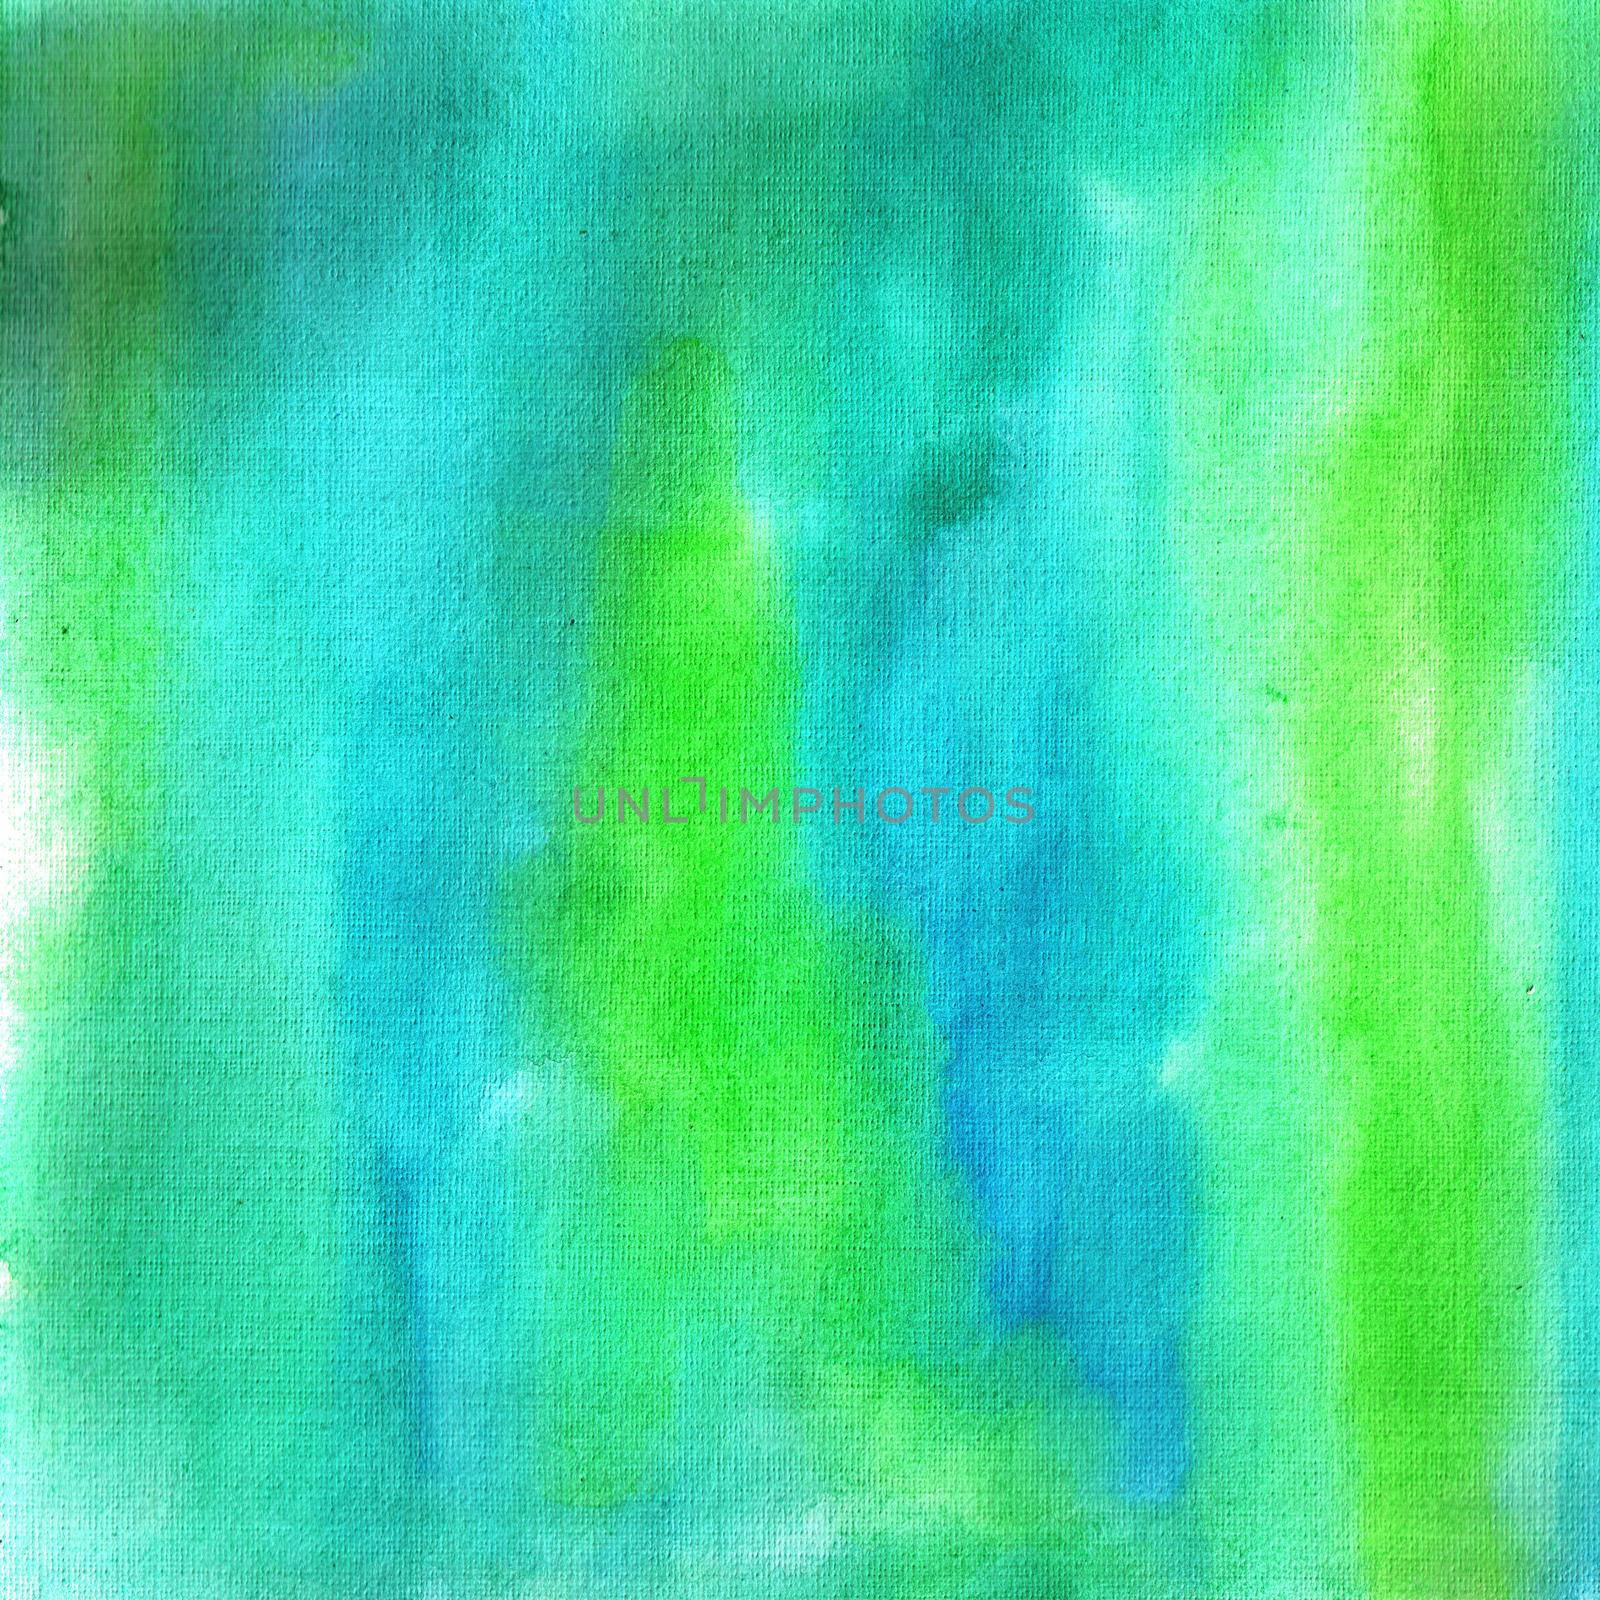 Blue and green watercolor hand drawn background by Rina_Dozornaya